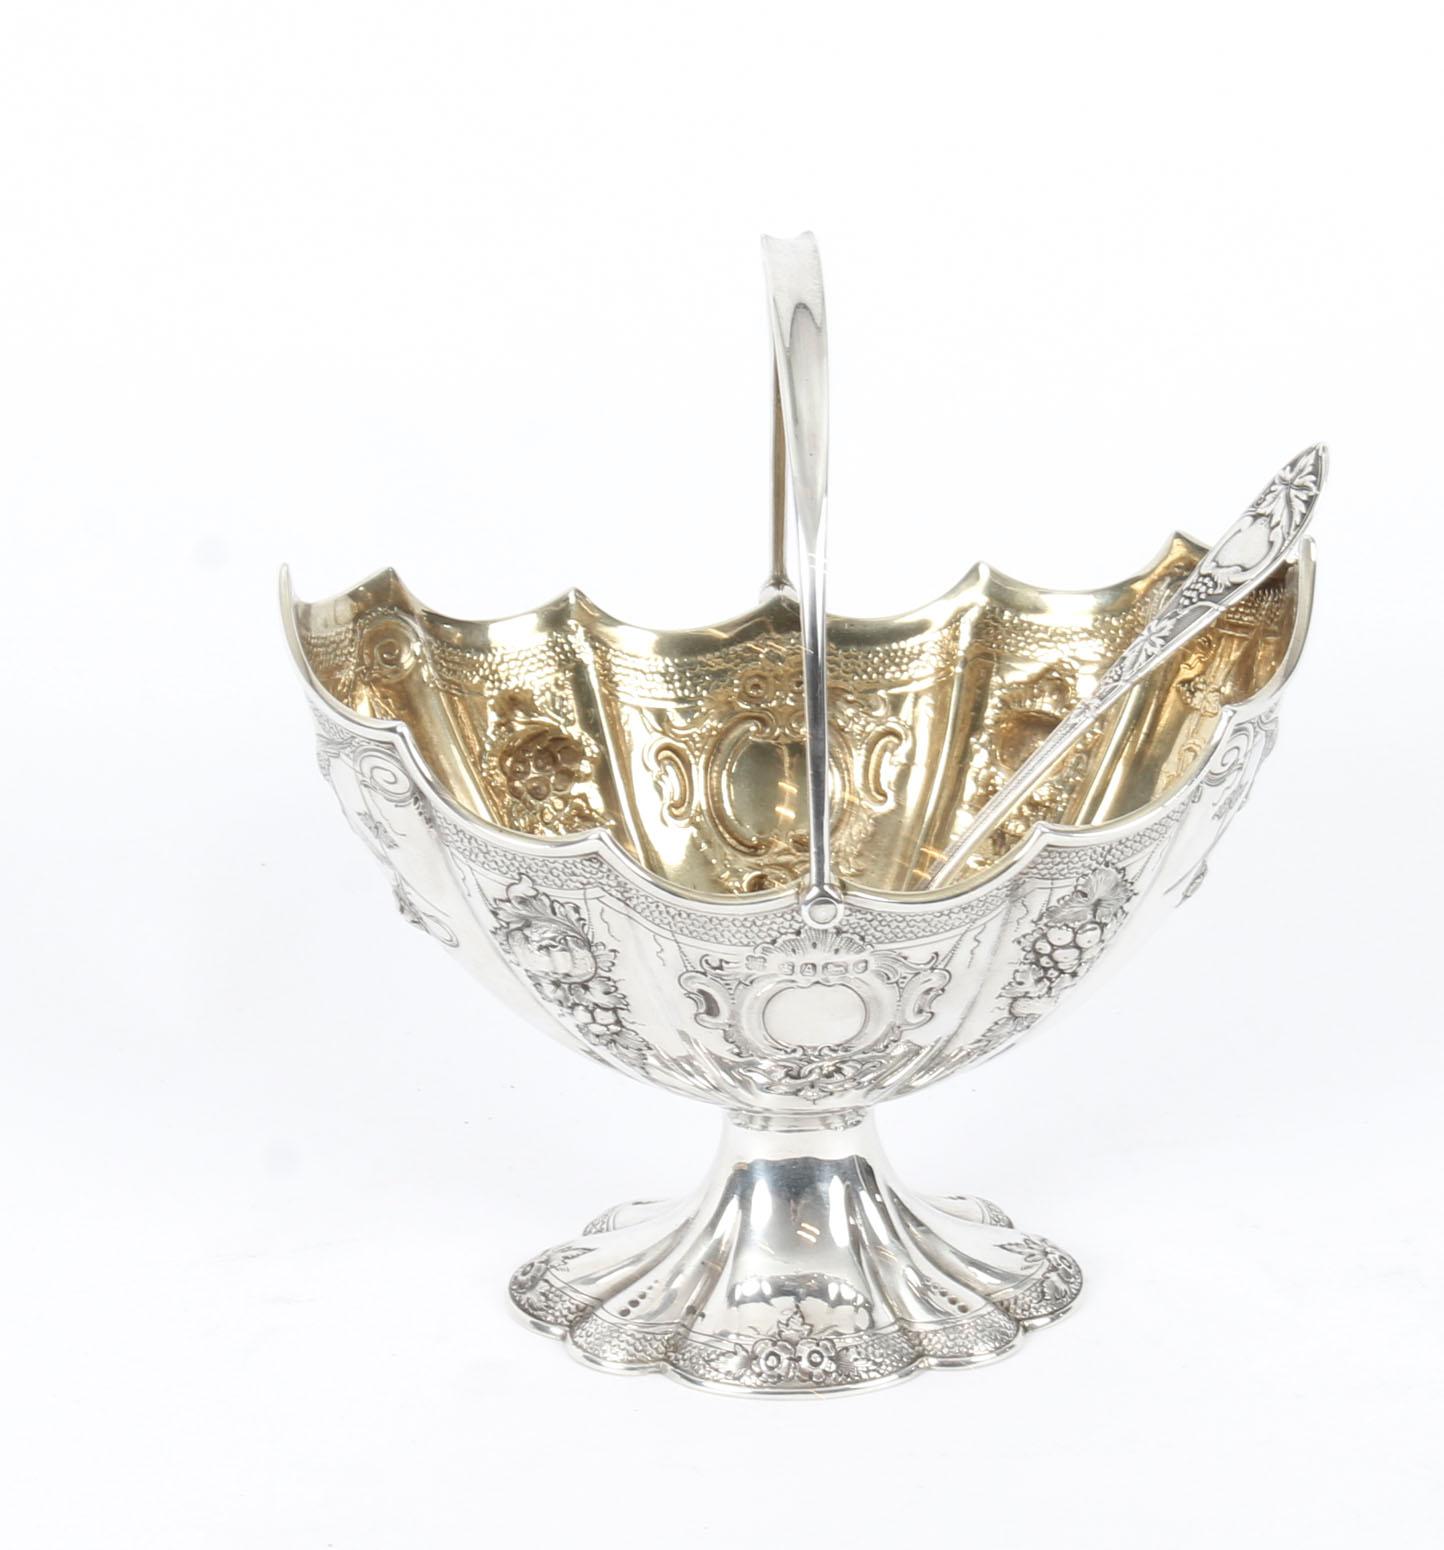 This is a delightful cased Victorian sterling silver sugar bowl and matching sugar sifter bearing hallmarks for Sheffield 1868 and the makers mark of the renowned silversmith Martin Hall & Co.

The sugar bowl of oval helmet form with repousse